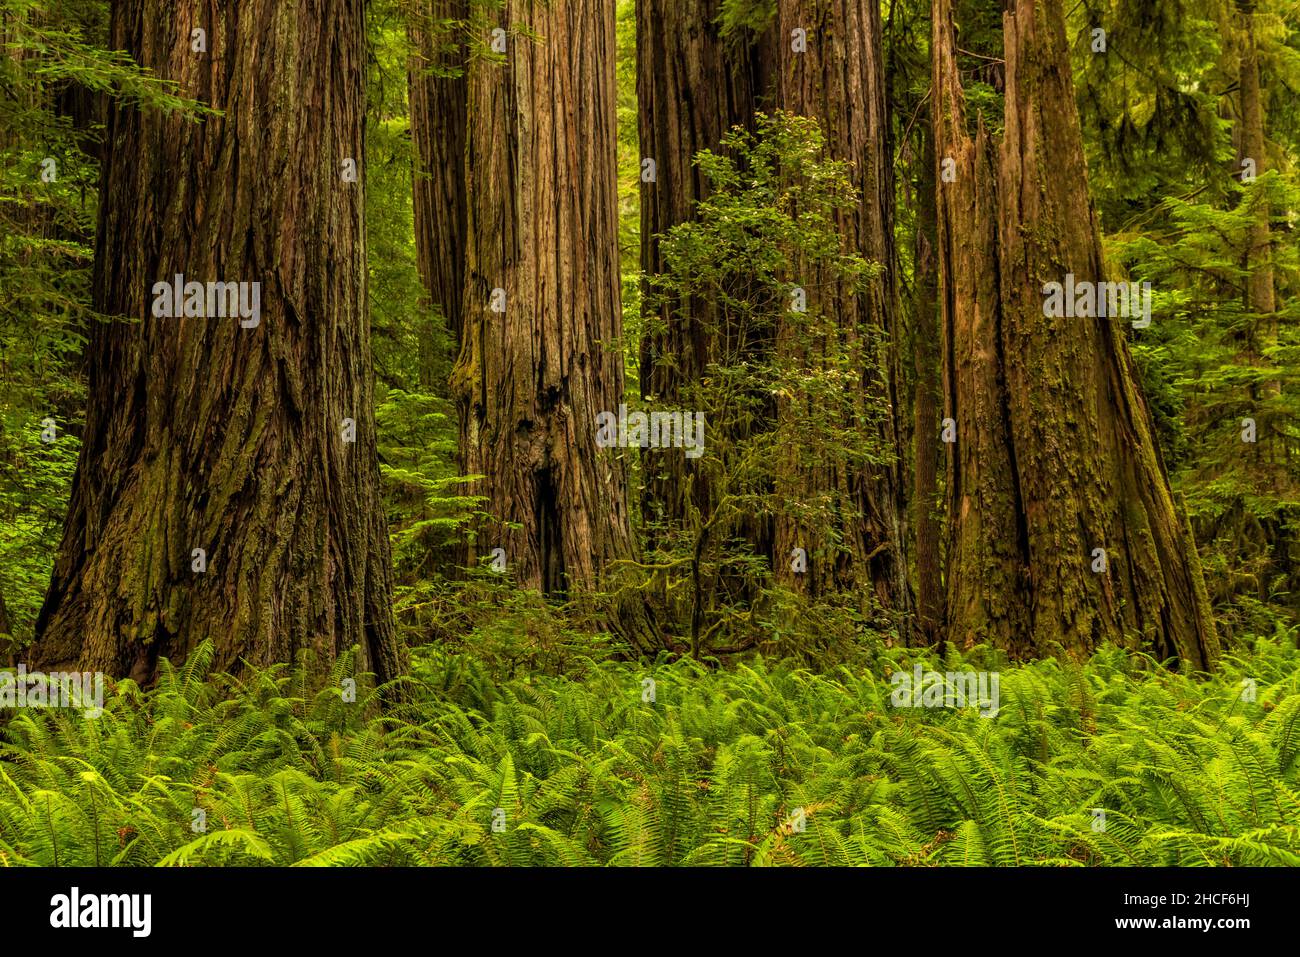 Sword Ferns surround the base of giant redwood trees the Simpson Reed Grove in Jedediah Smith Redwoods State Park, Crescent City, California. Stock Photo